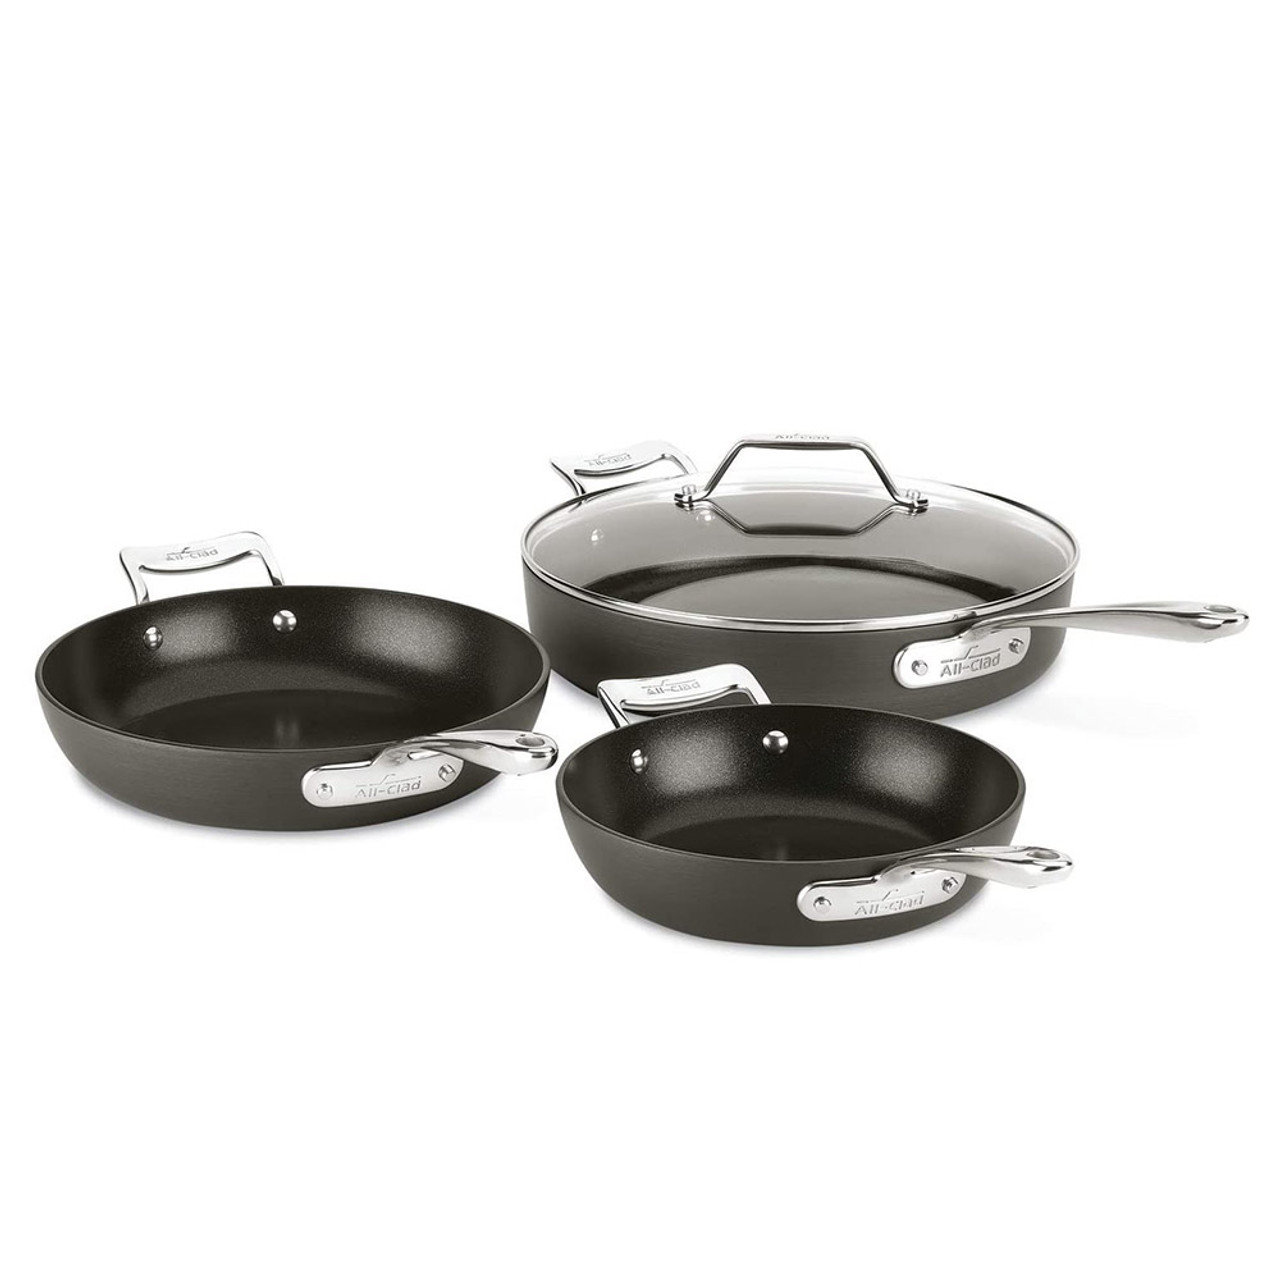 https://cdn11.bigcommerce.com/s-hccytny0od/images/stencil/1280x1280/products/3569/12744/all-clad-essentials-nonstick-4pc-skillet-set__05012.1601383138.jpg?c=2?imbypass=on